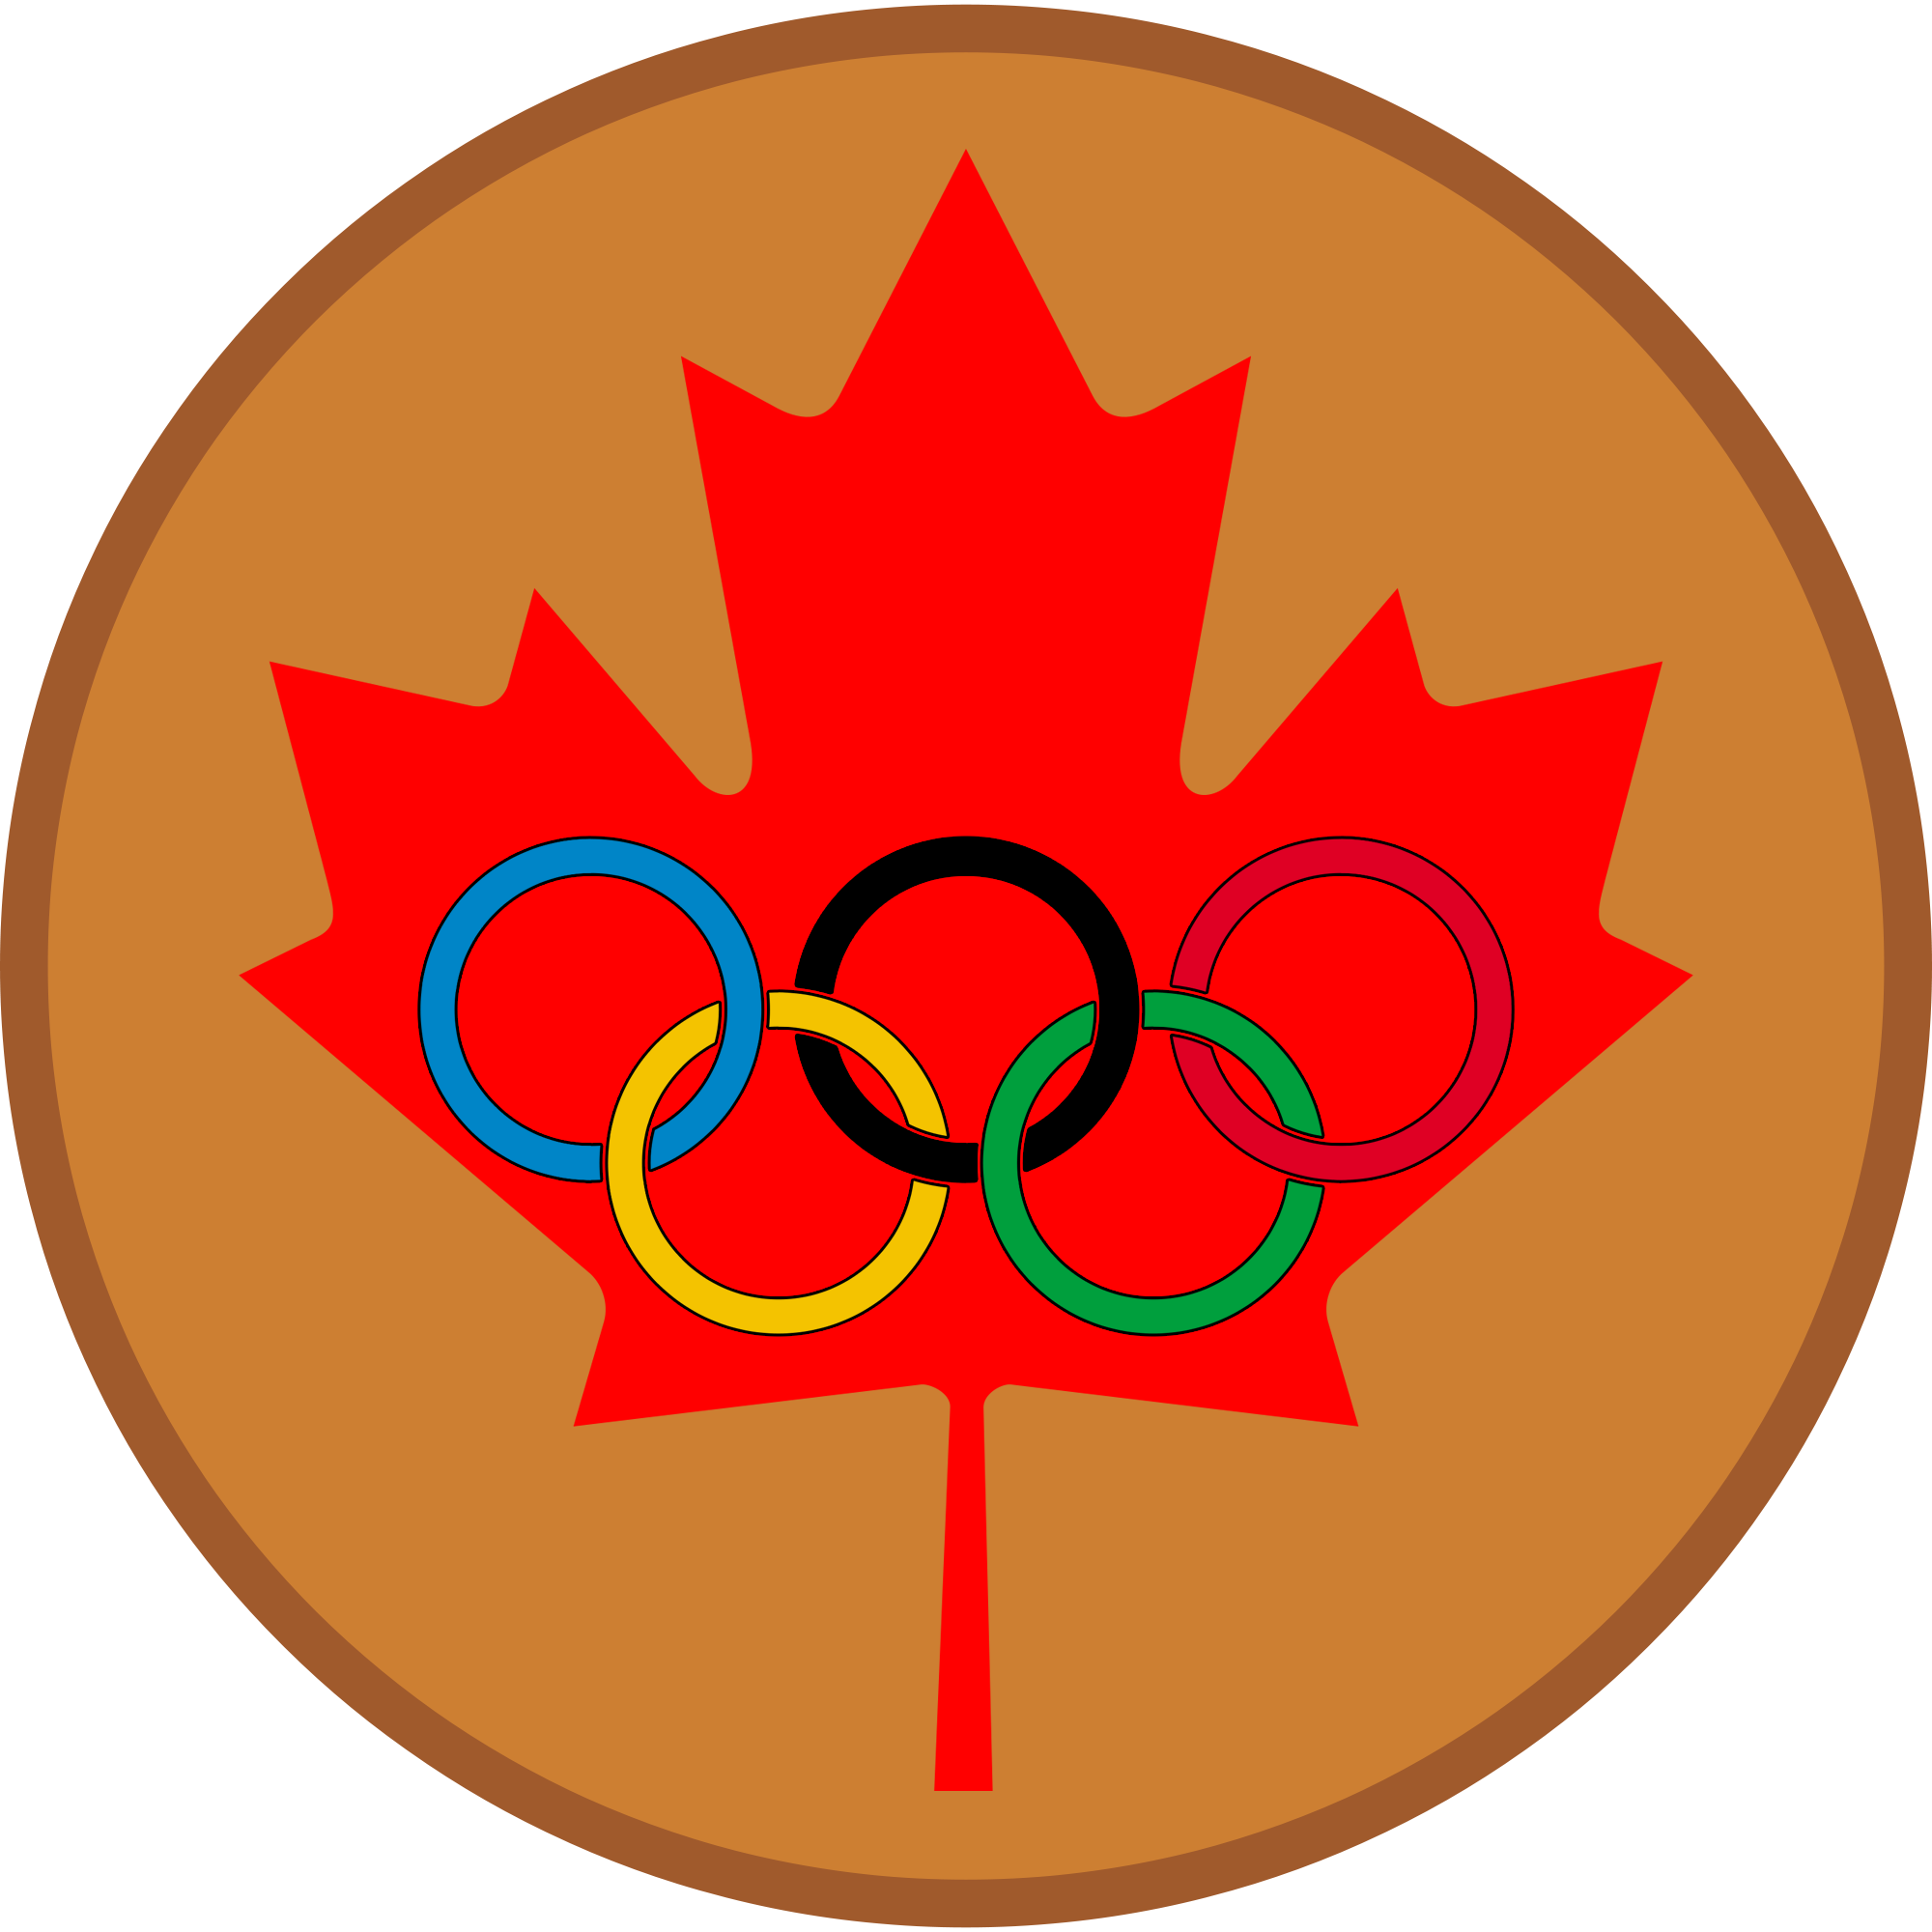 Maple leaf olympic bronze medal.png